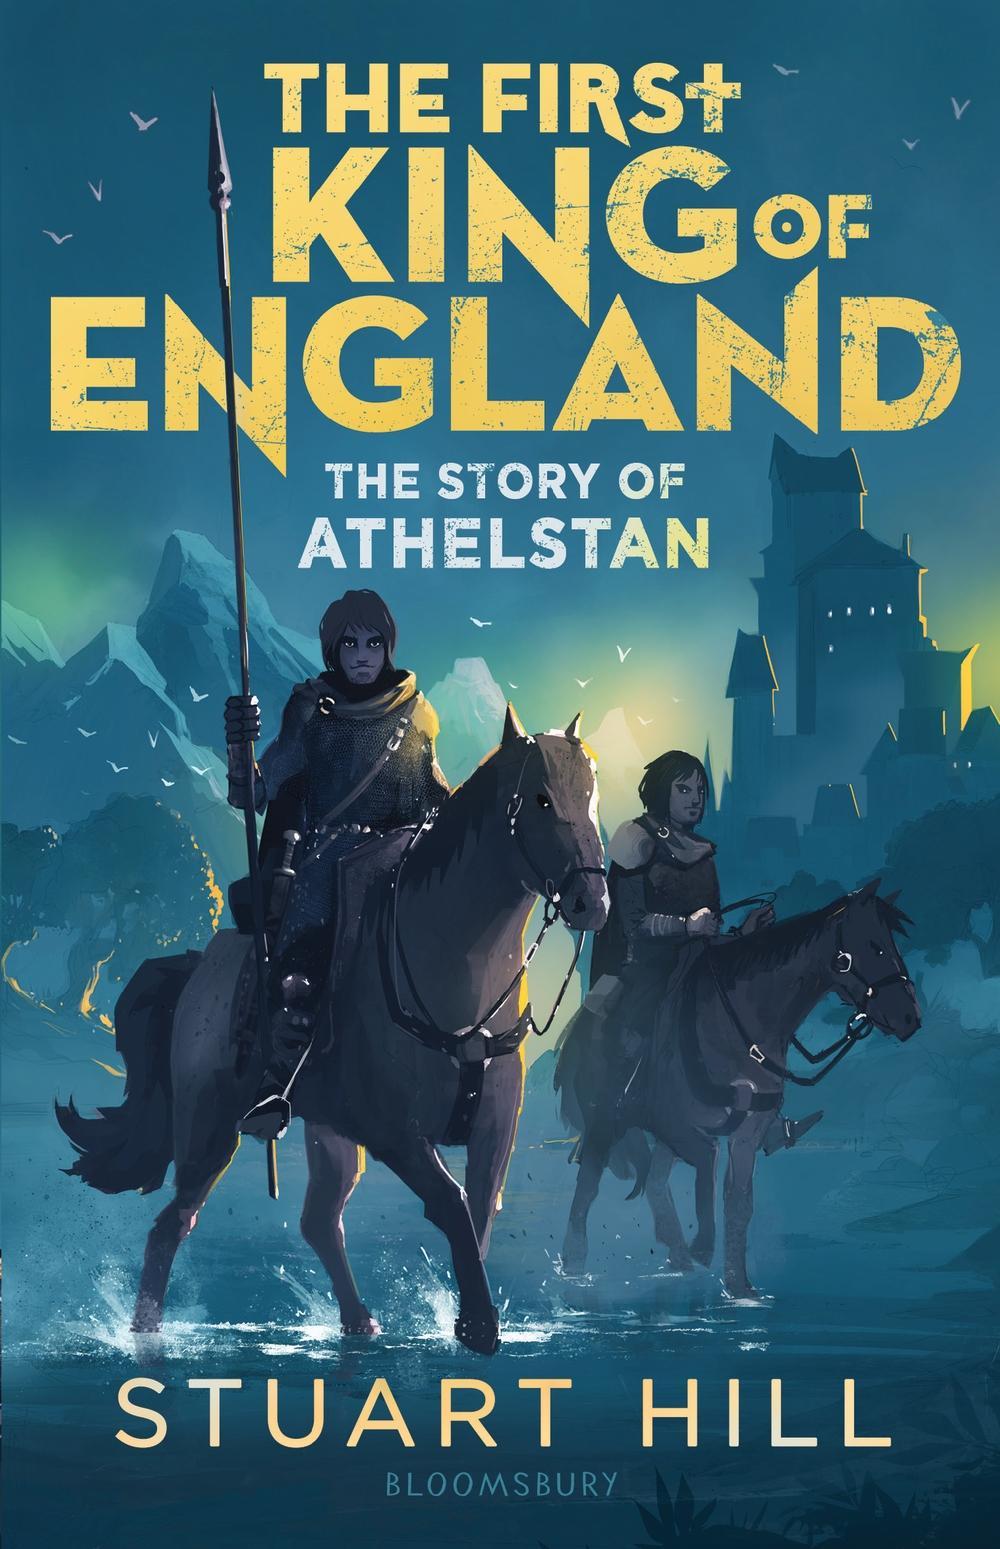 First King of England: The Story of Athelstan